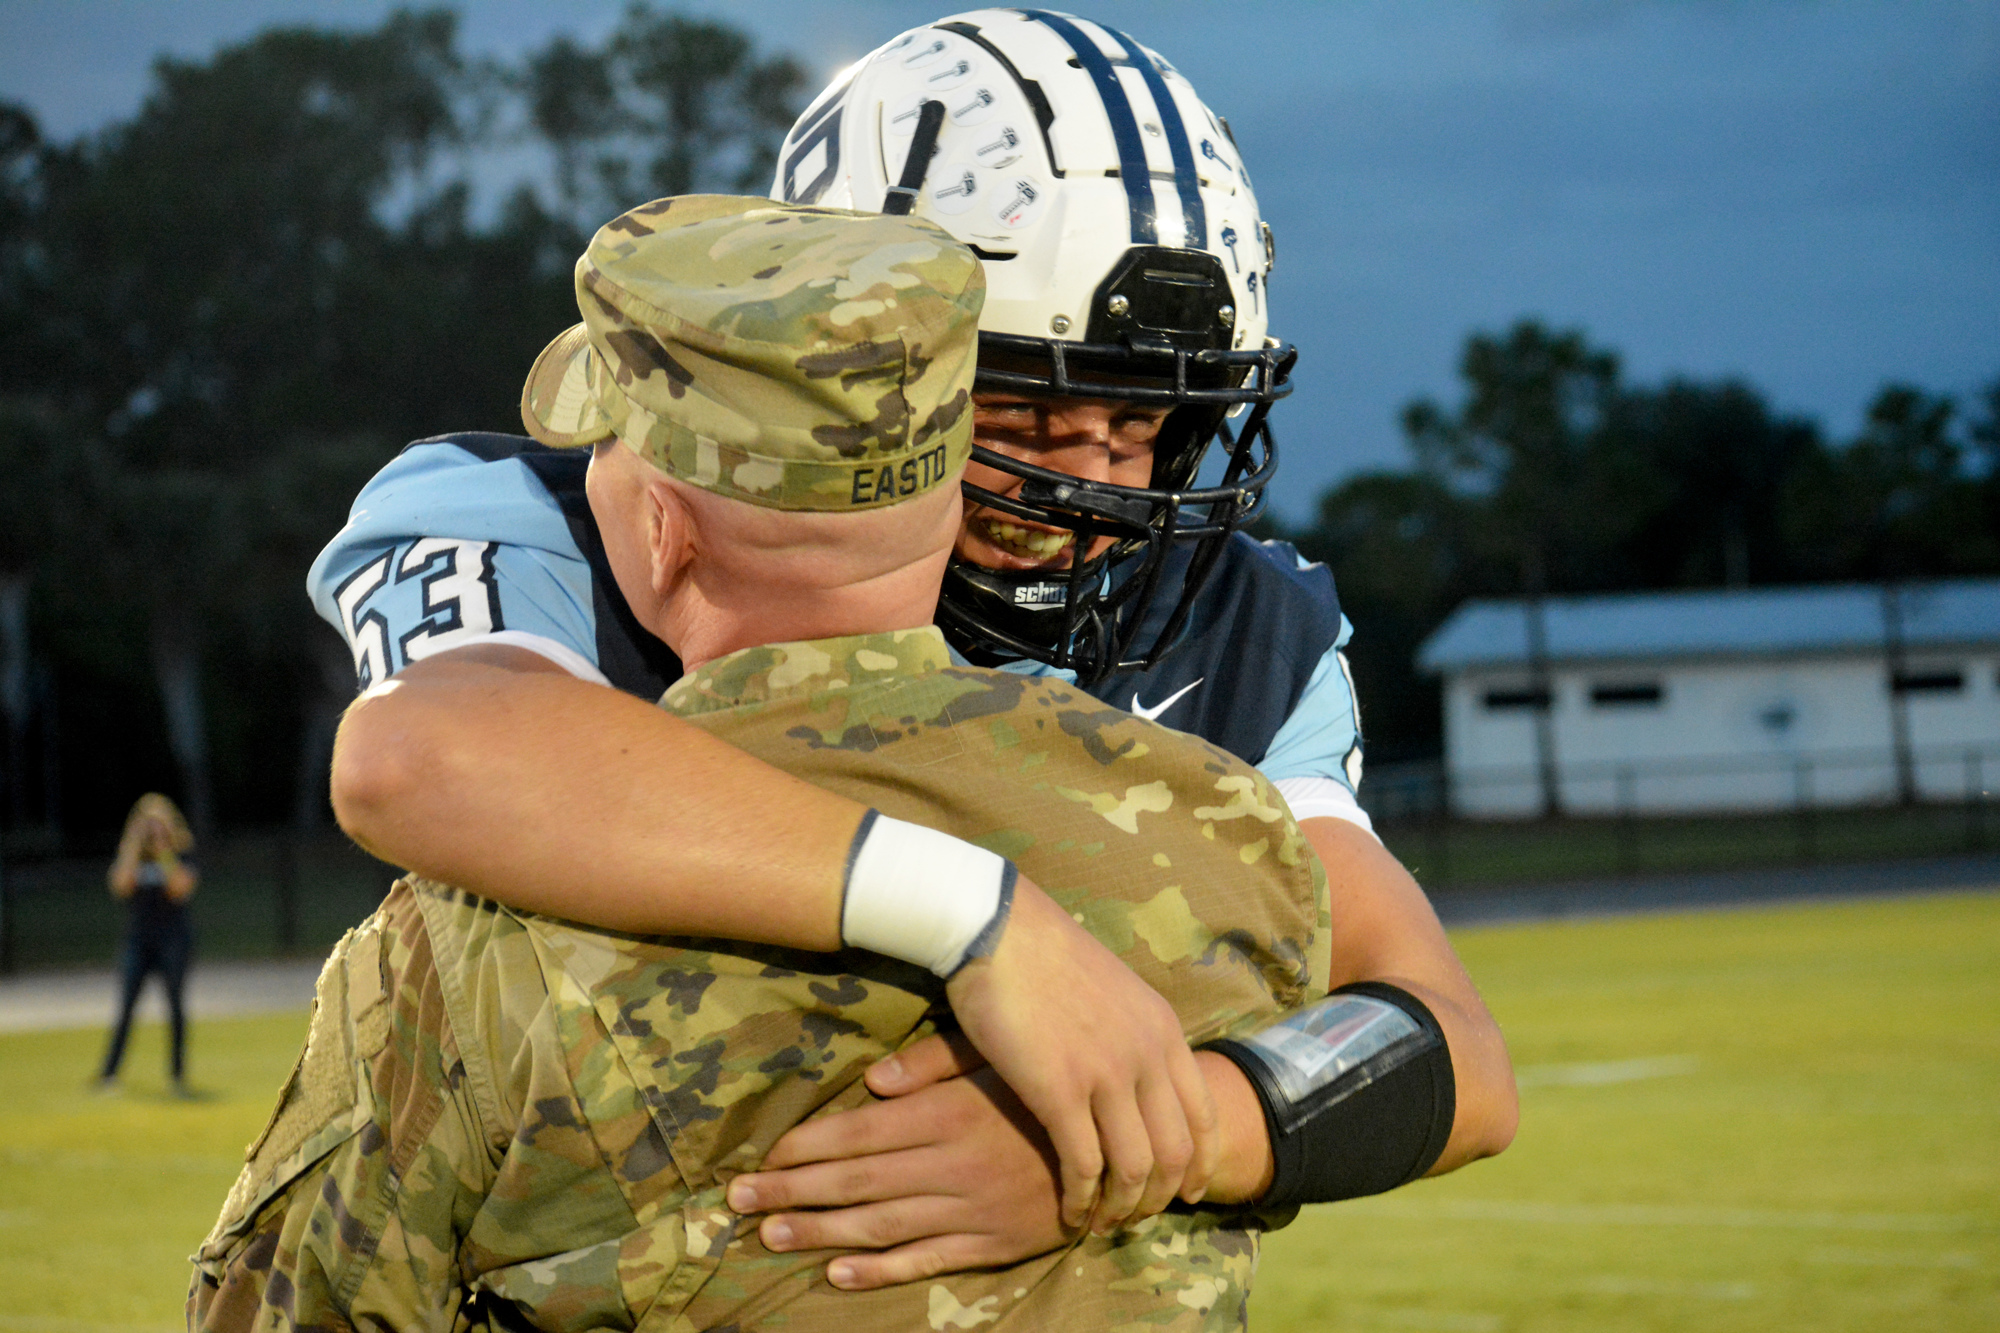 Out-of-Door Academy senior JJ Easto hugs his father, Capt. Josh Easto, after a surprise homecoming during a football game. Photo by Ryan Kohn.